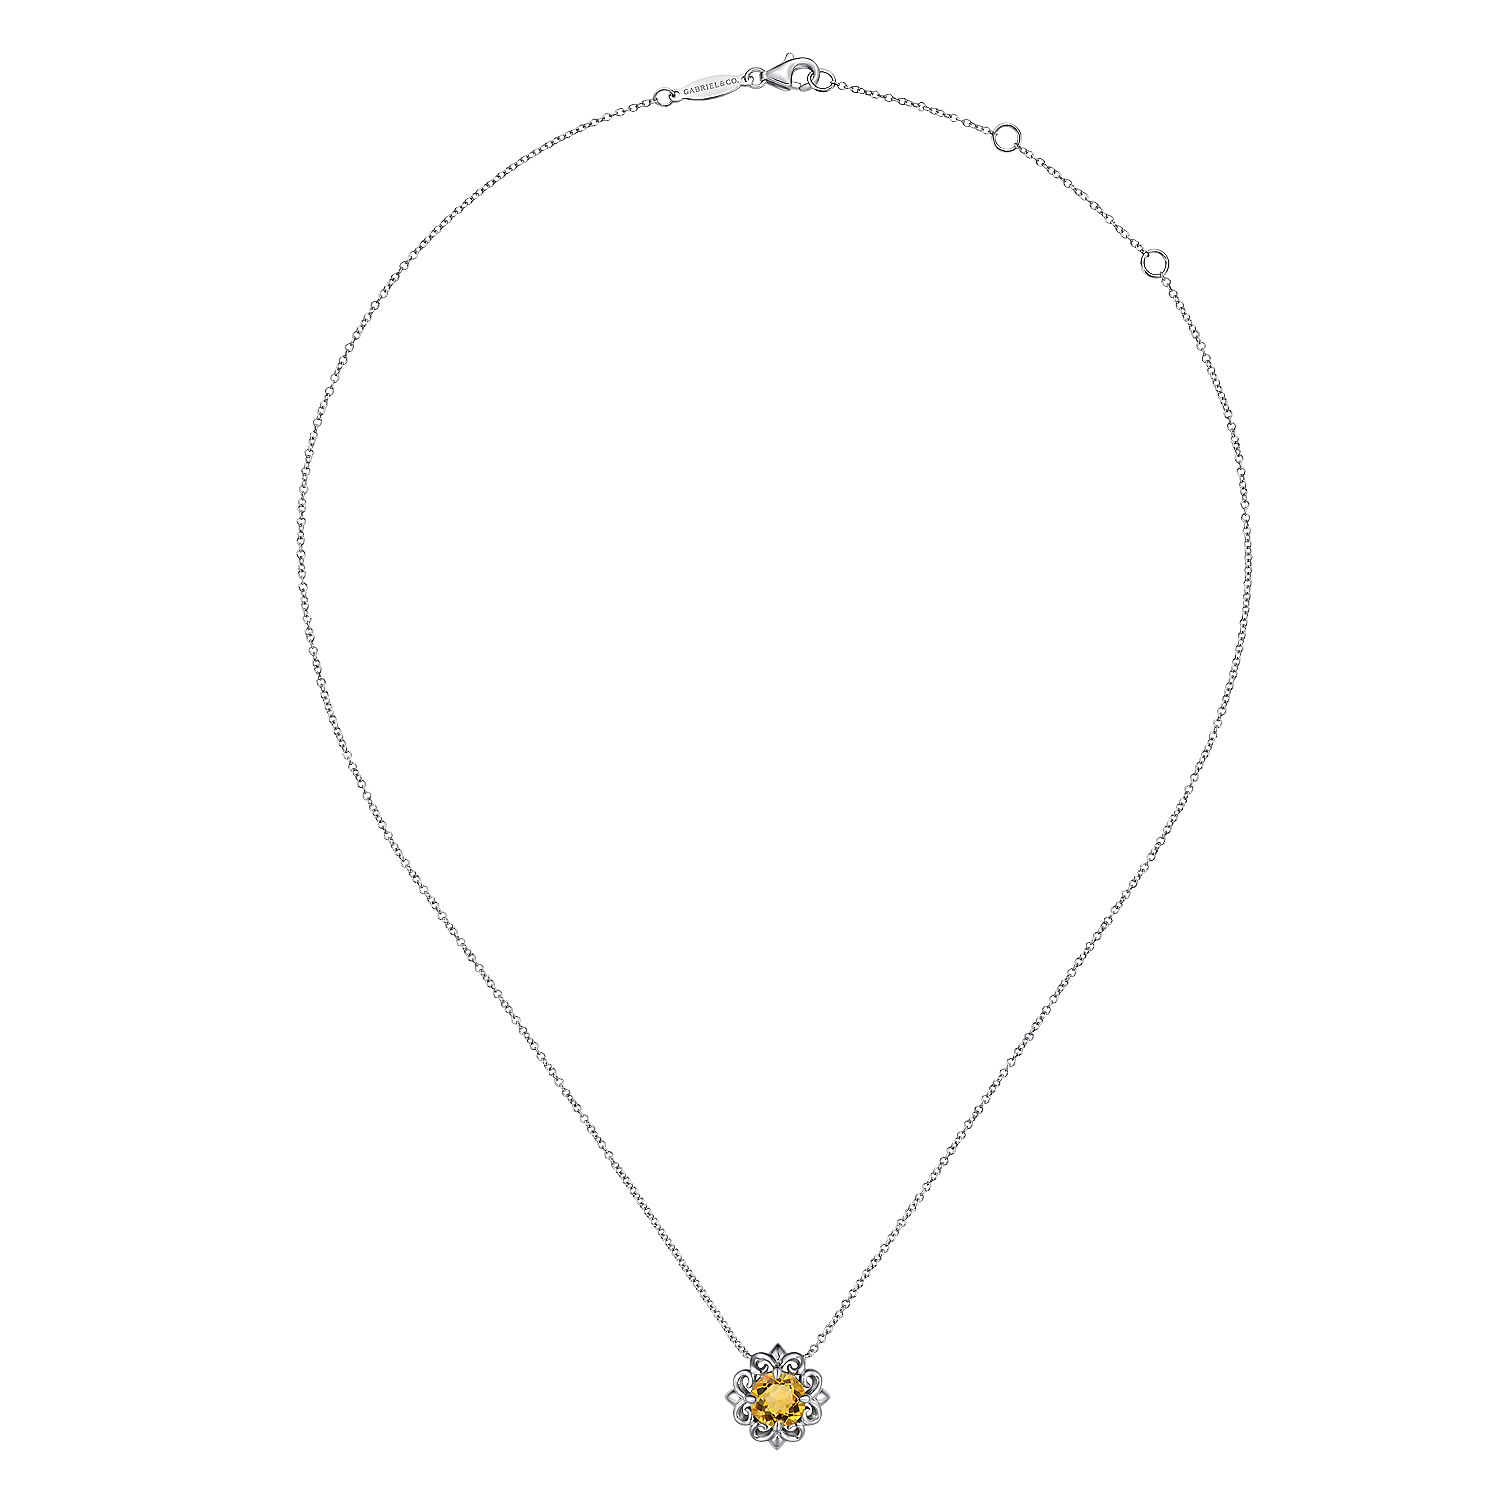 18 inch 925 Sterling Silver Citrine Flower Pendant Necklace